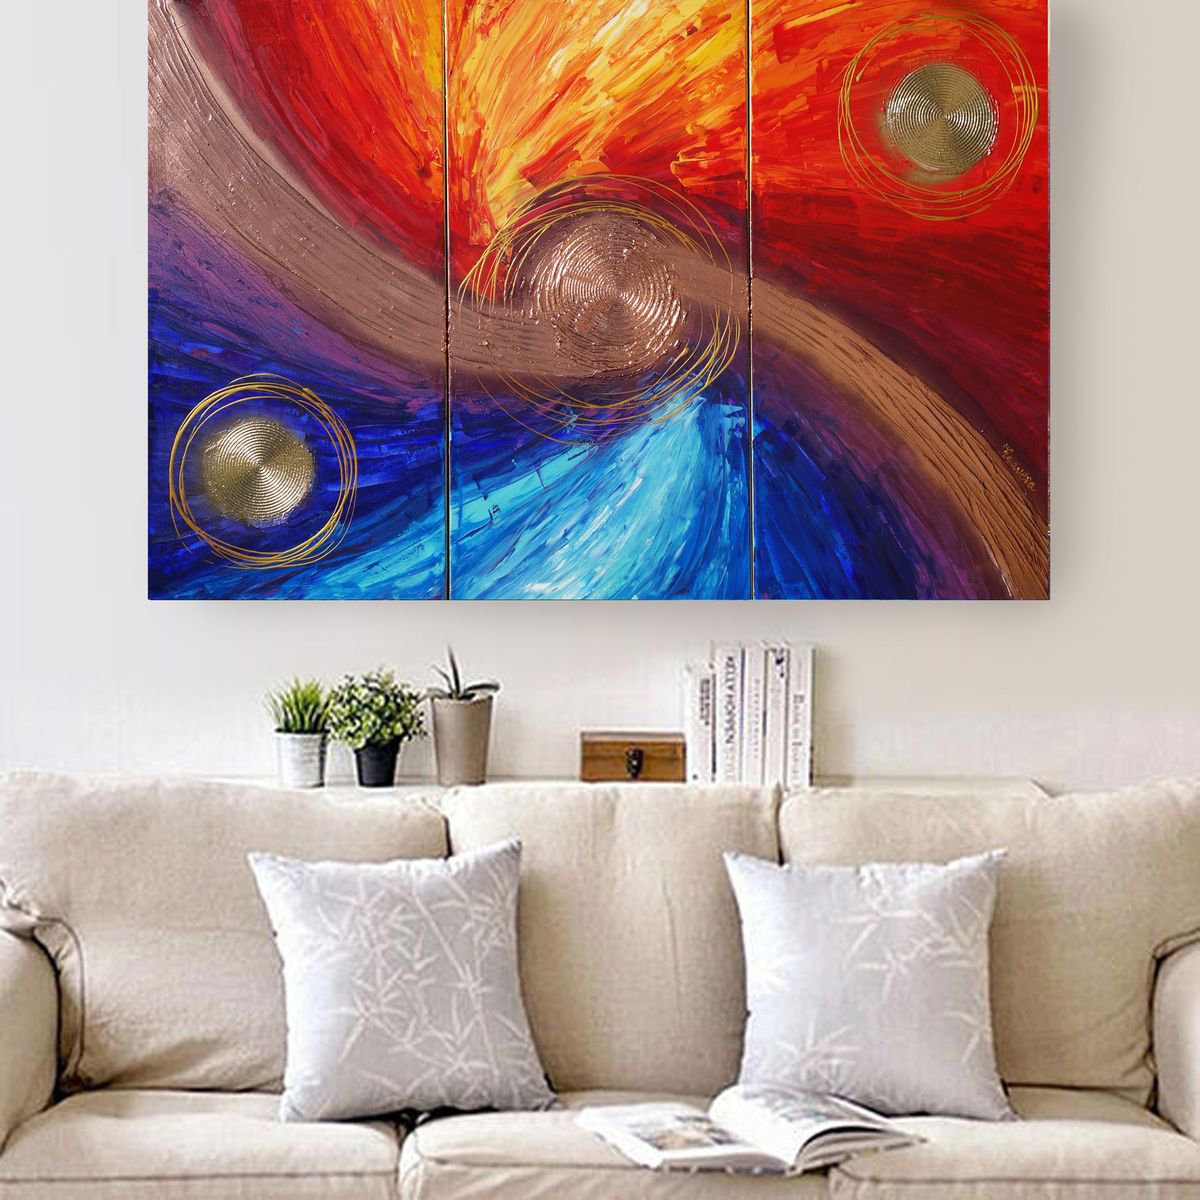 Rainbow A321 Large abstract paintings Palette knife 100x150x2 cm set of 3 original abstrac... by Ksavera